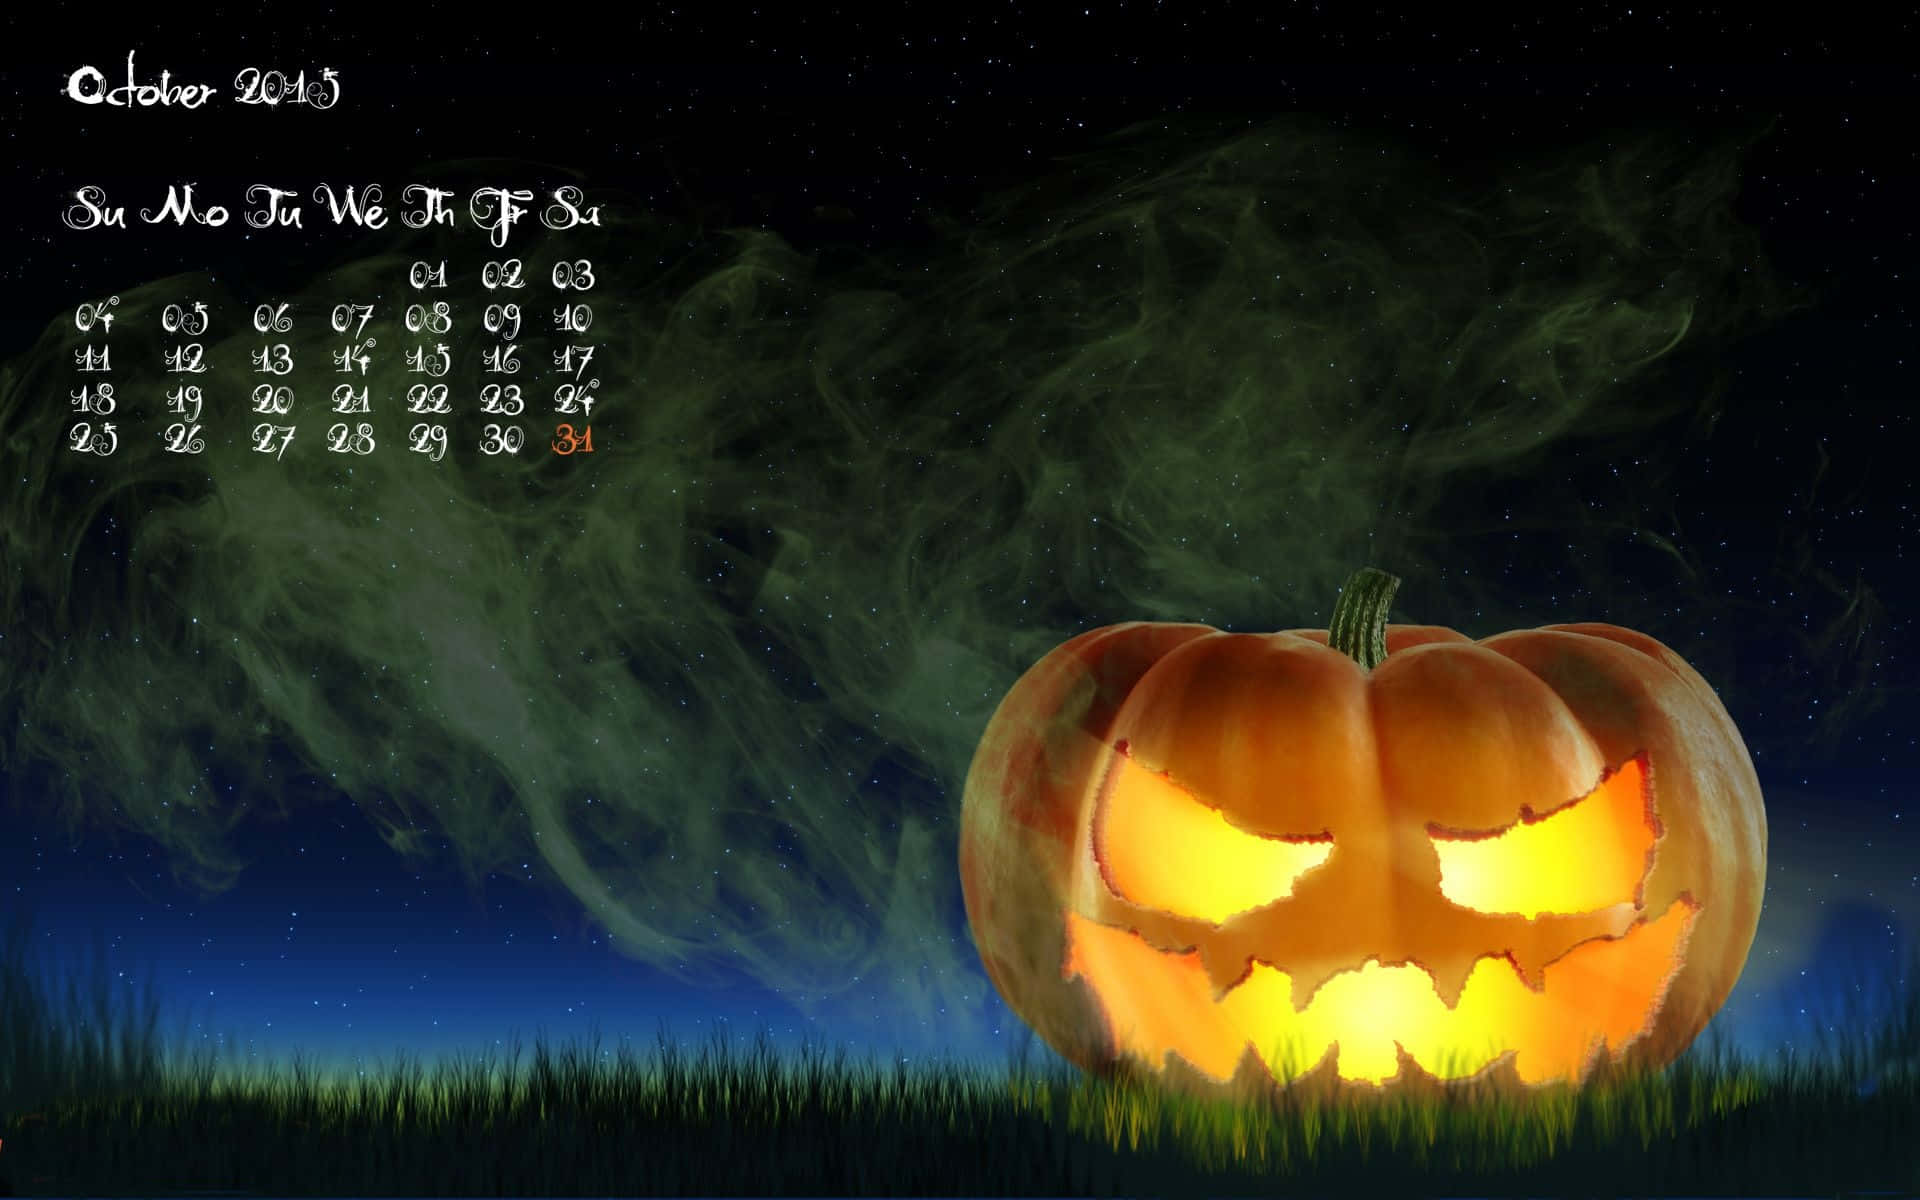 Celebrate the start of the autumn season with a delicious pumpkin! Wallpaper